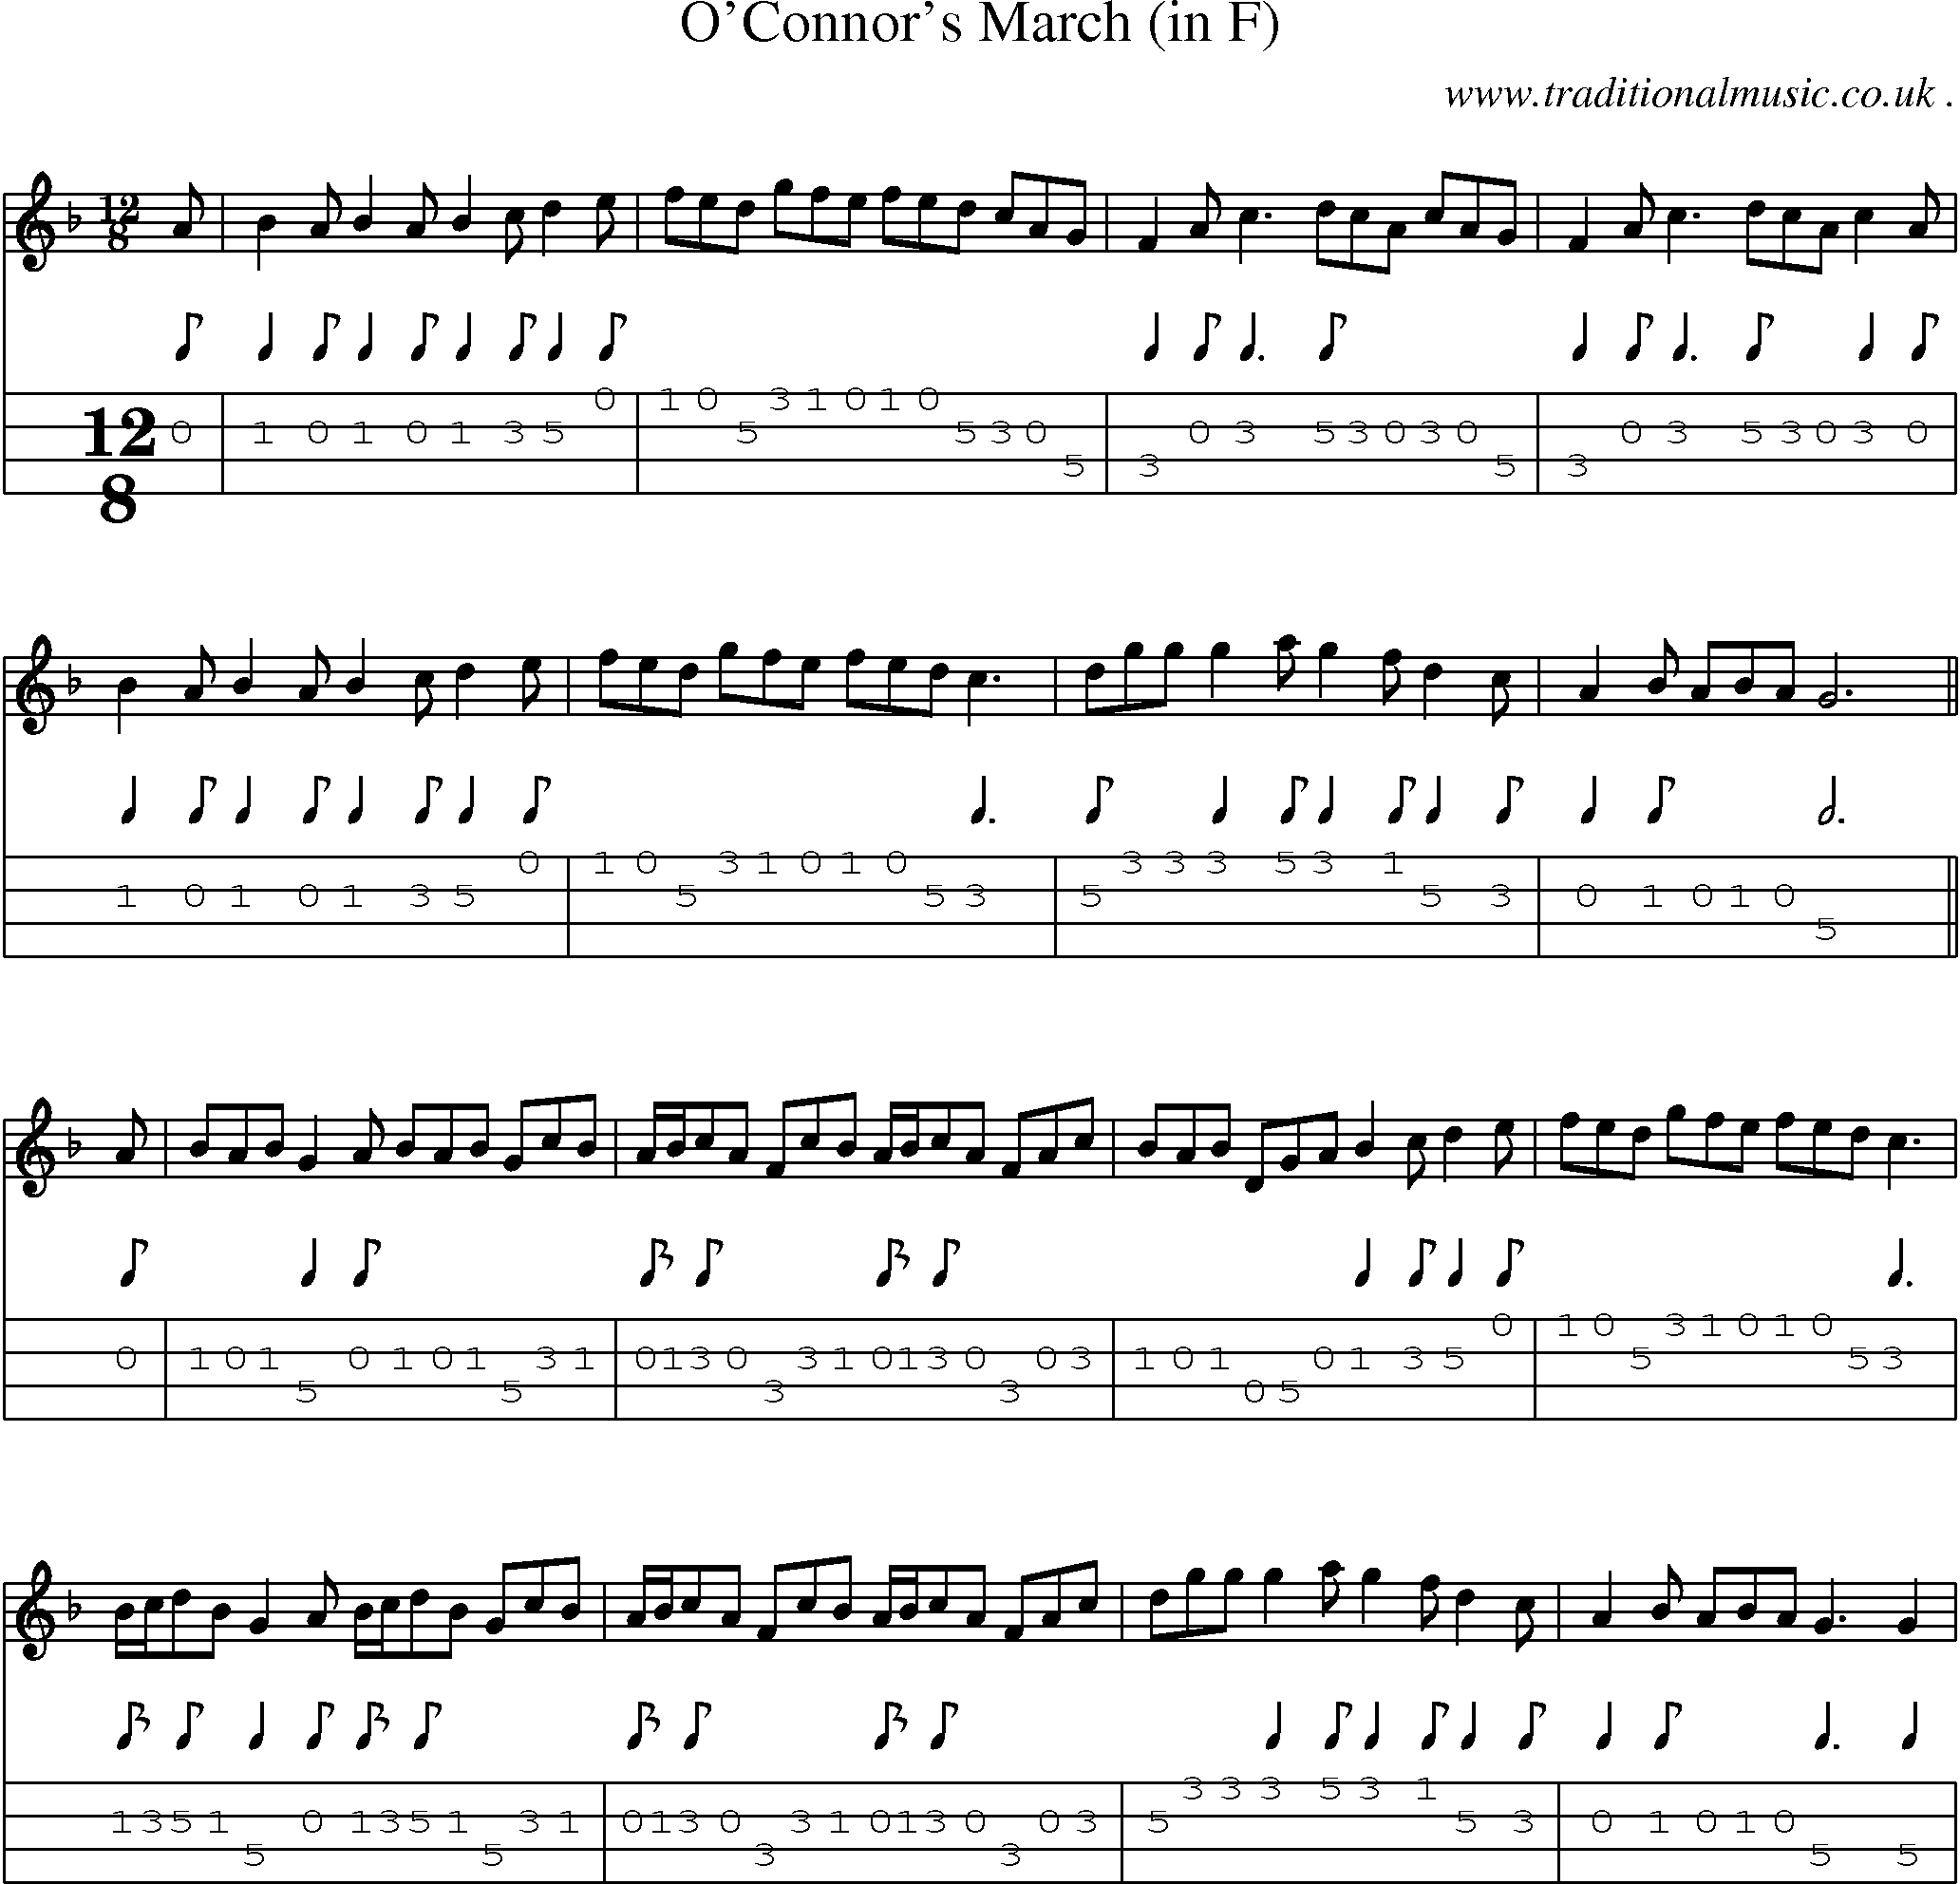 Sheet-Music and Mandolin Tabs for Oconnors March (in F)